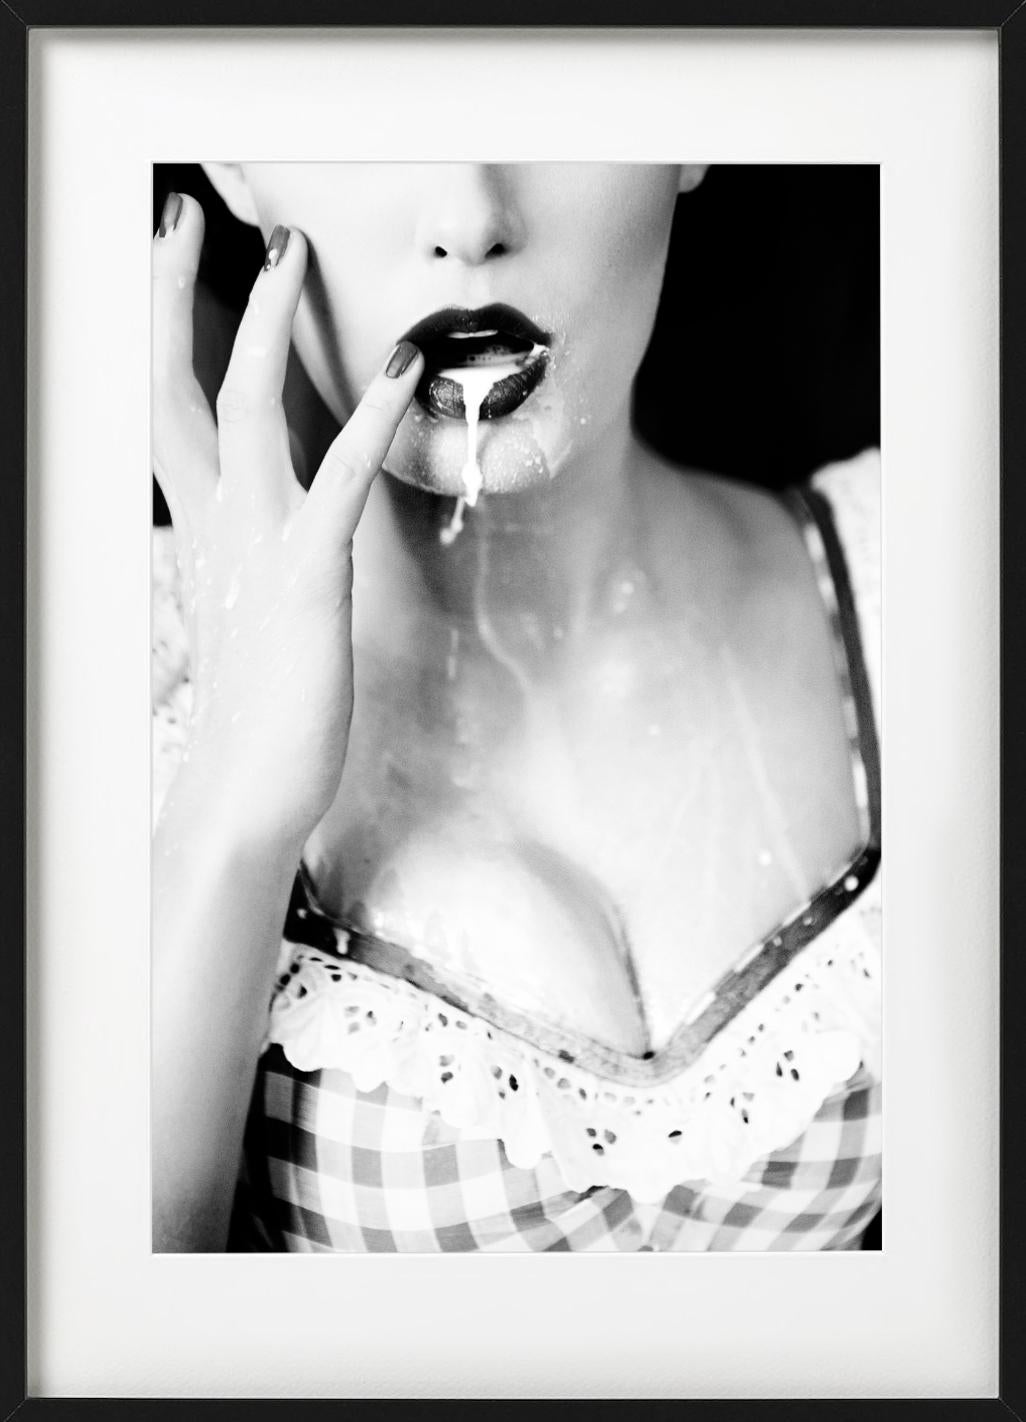 Thirsty - Milk dripping out of a Model's Mouth, b&w fine art photography, 2015 - Photograph by Ellen von Unwerth